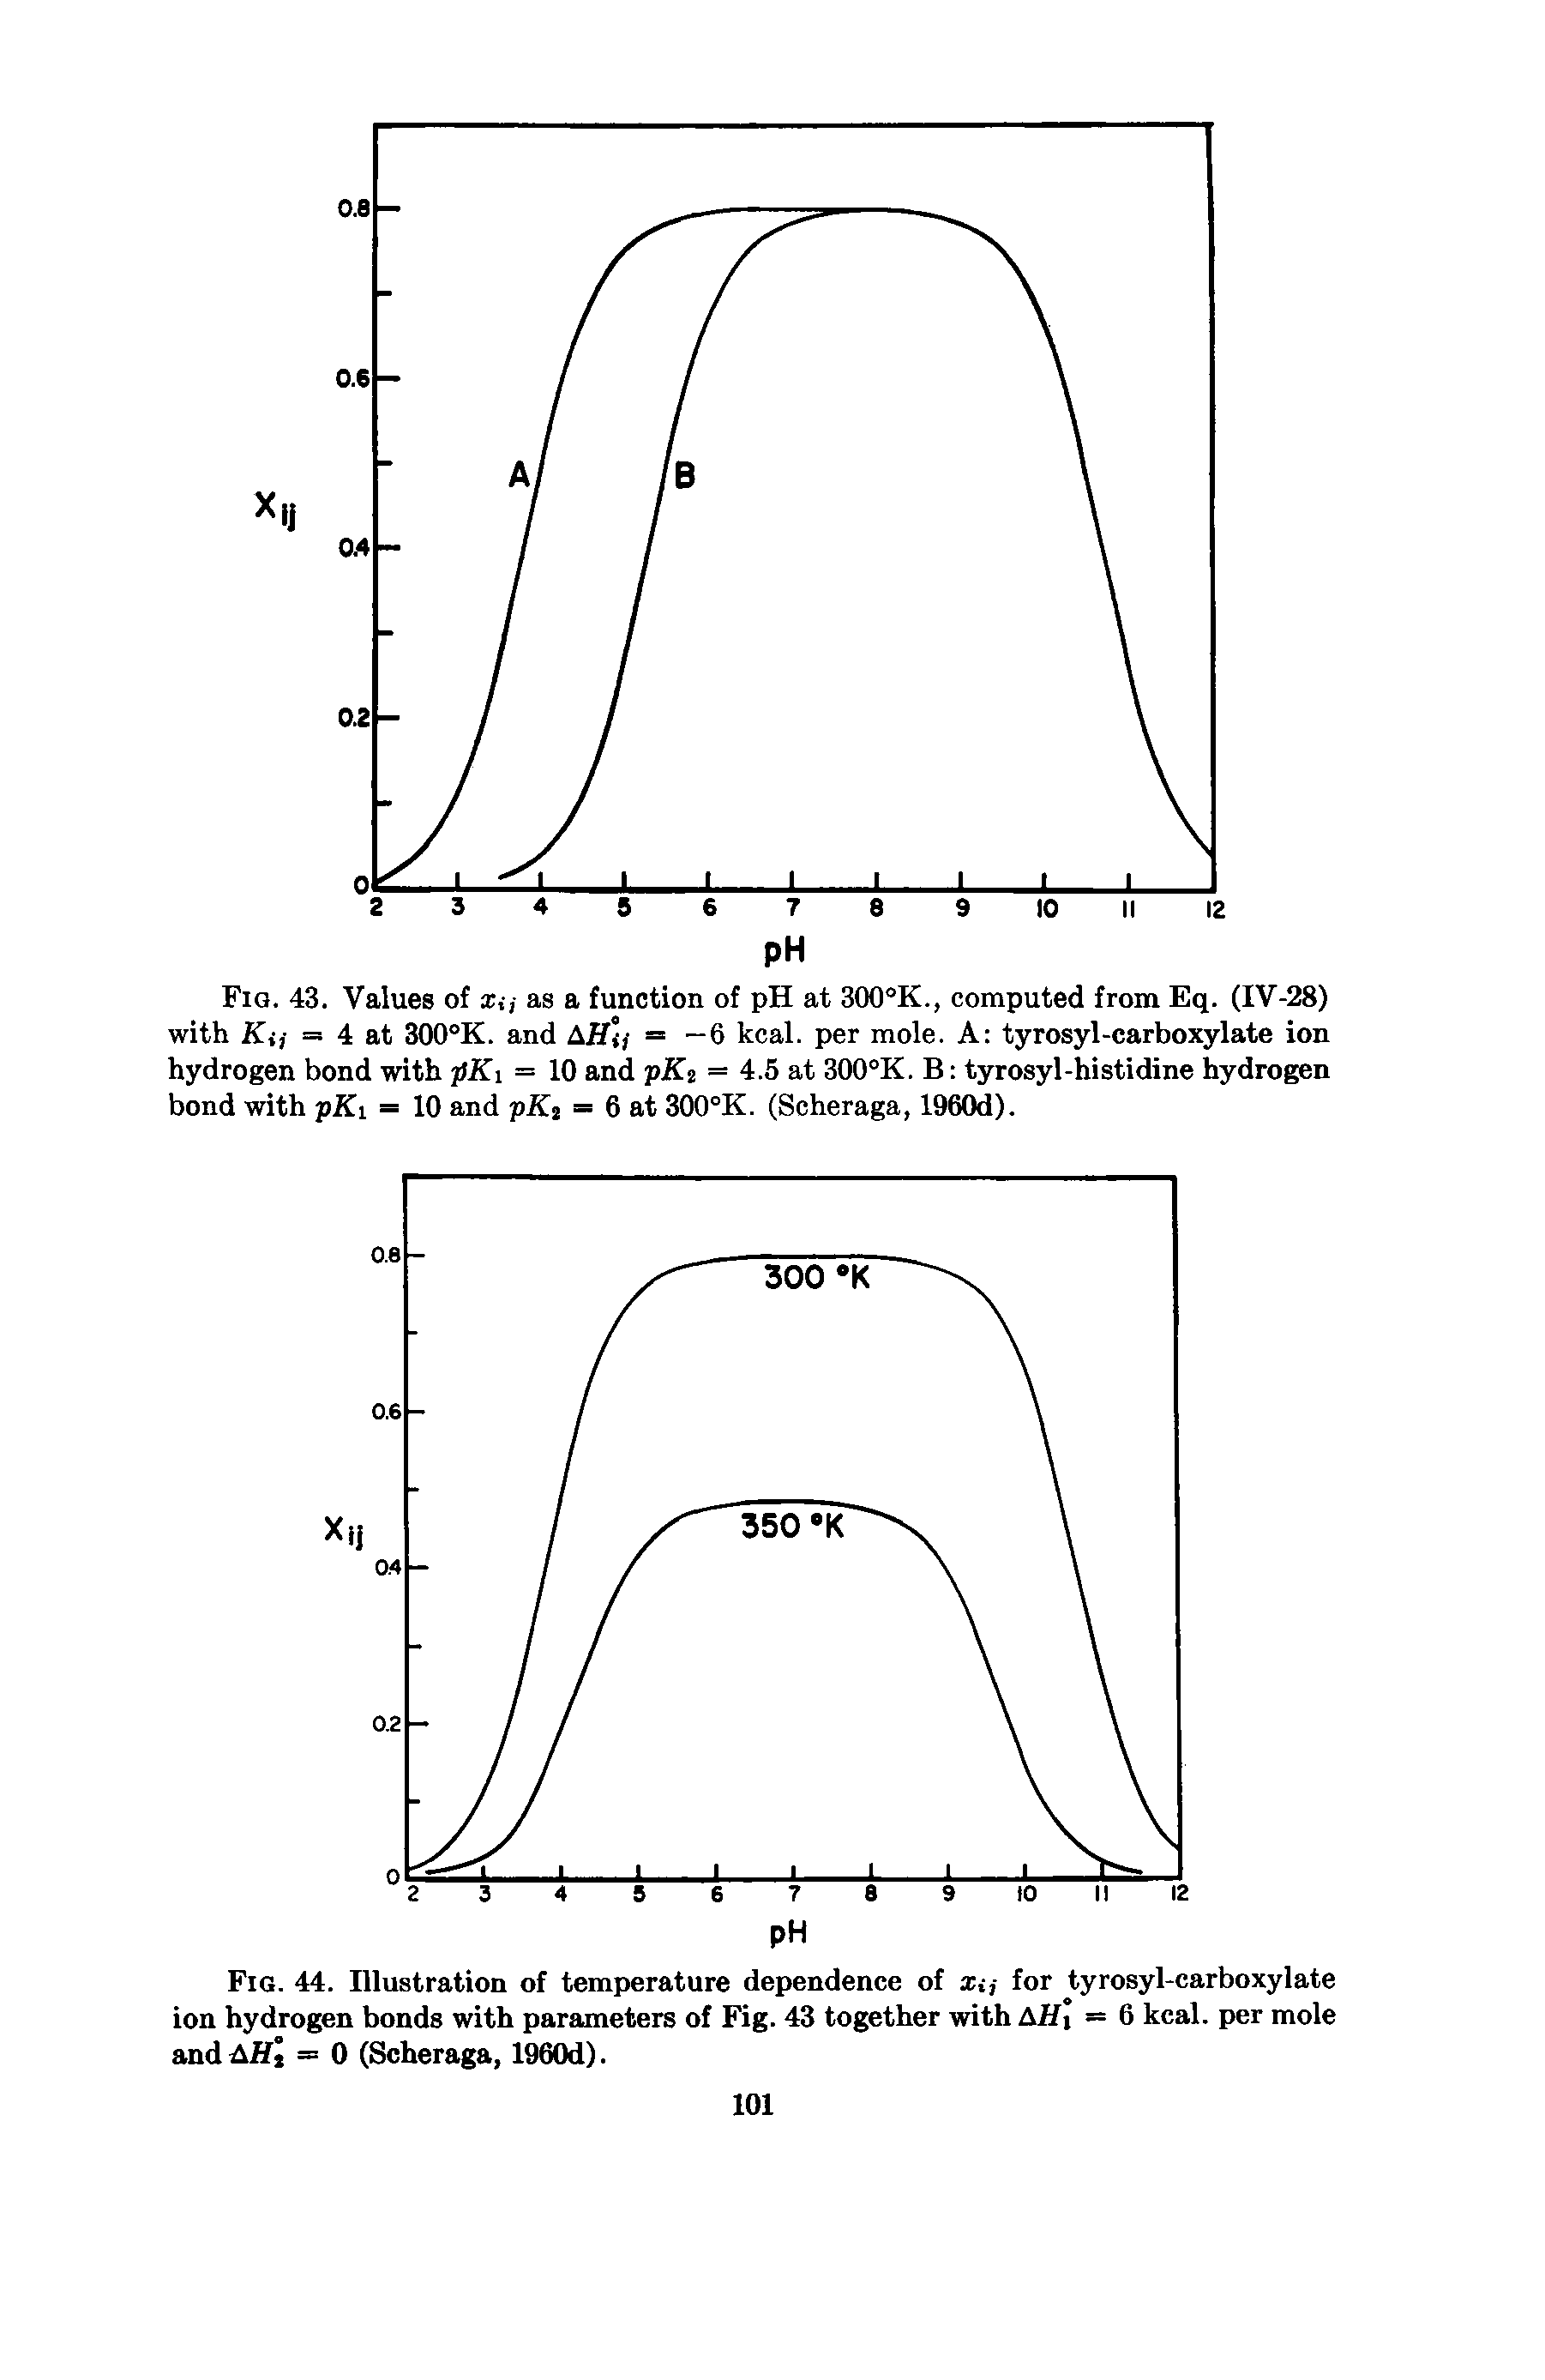 Fig. 44. Illustration of temperature dependence of xtj for tyrosyl-carboxylate ion hydrogen bonds with parameters of Fig. 43 together with AUi 6 kcal. per mole andAHj = 0 (Scheraga, 1960d).